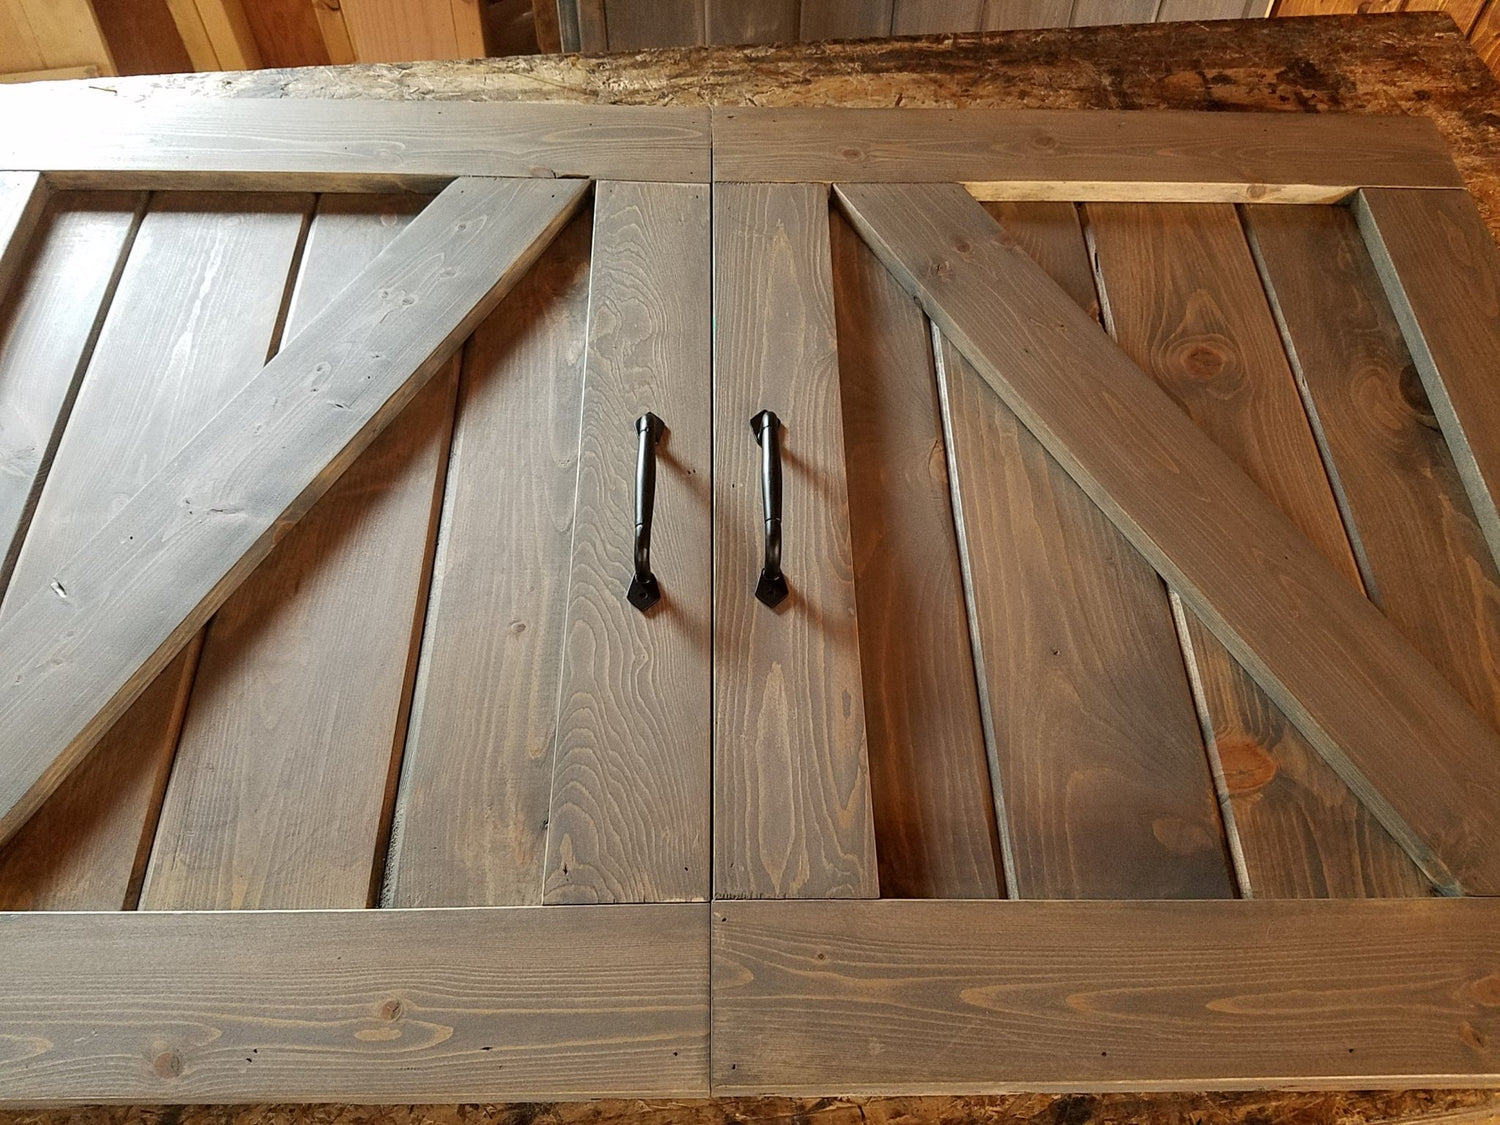 Custom Z Bar TV Barn Door Package - TV Cover with Barn Hardware - NW WoodenNail